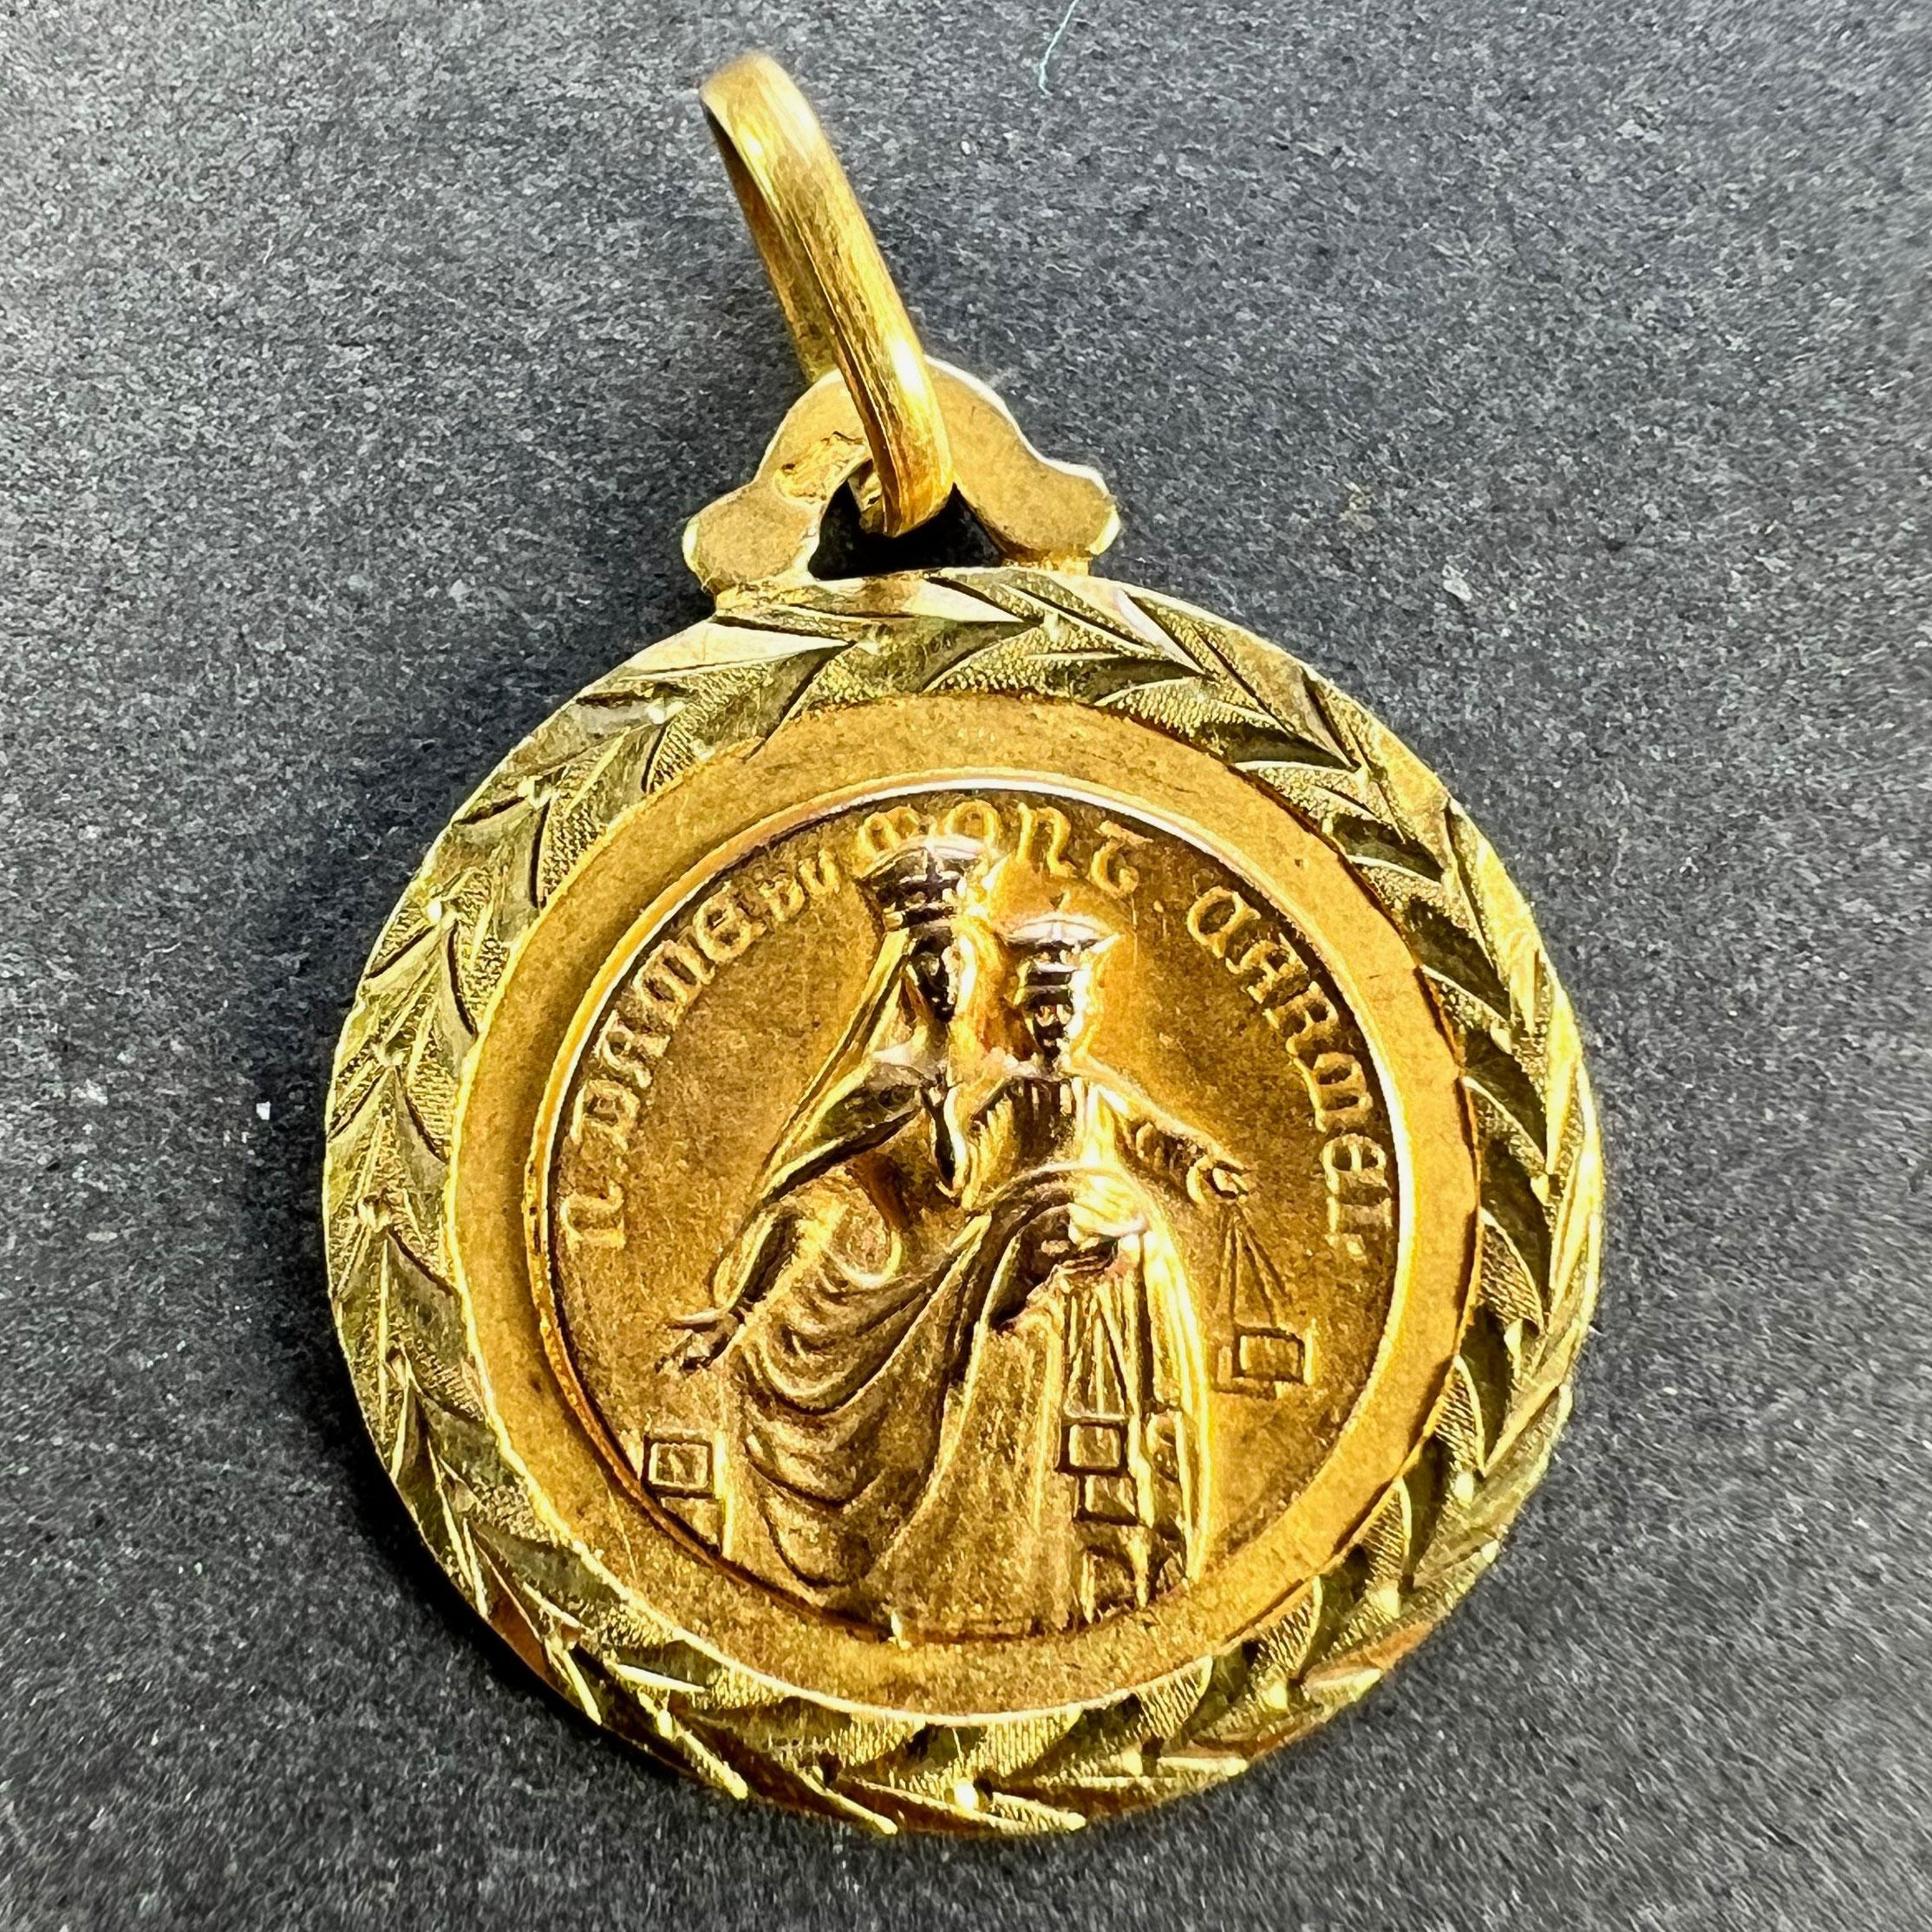 A French 18 karat (18K) yellow gold charm pendant designed as a medal depicting the Madonna and Child holding a pair of devotional scapulars, with the phrase N. (Notre) Dame du Mont Carmel surrounding them. The other side depicts Jesus Christ with